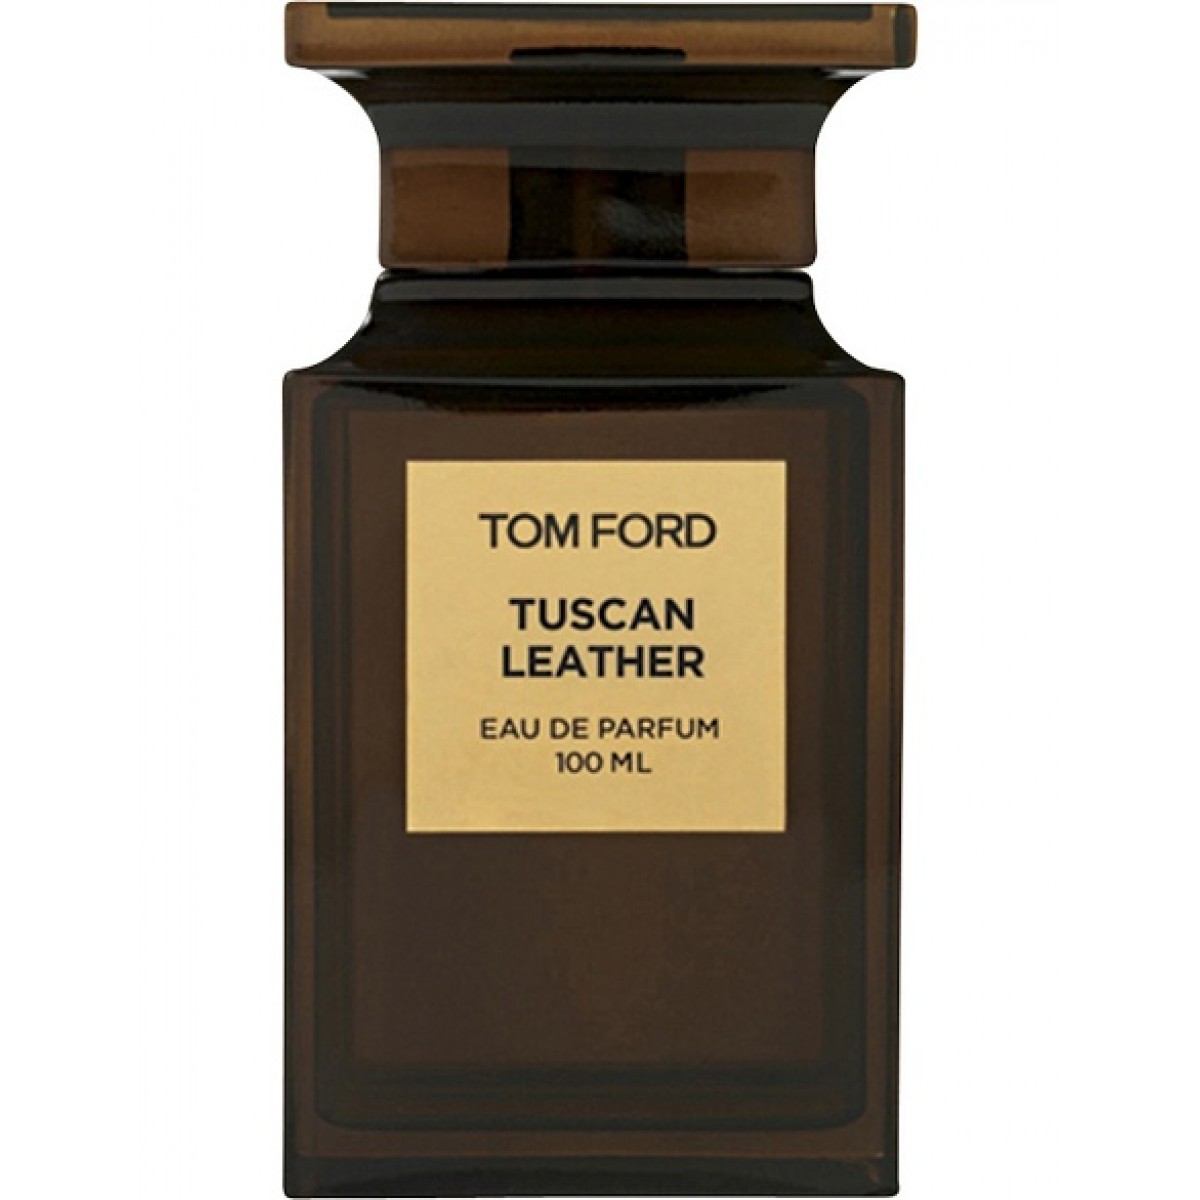 Actualizar 109+ imagen tom ford tuscan leather 50ml - Abzlocal.mx